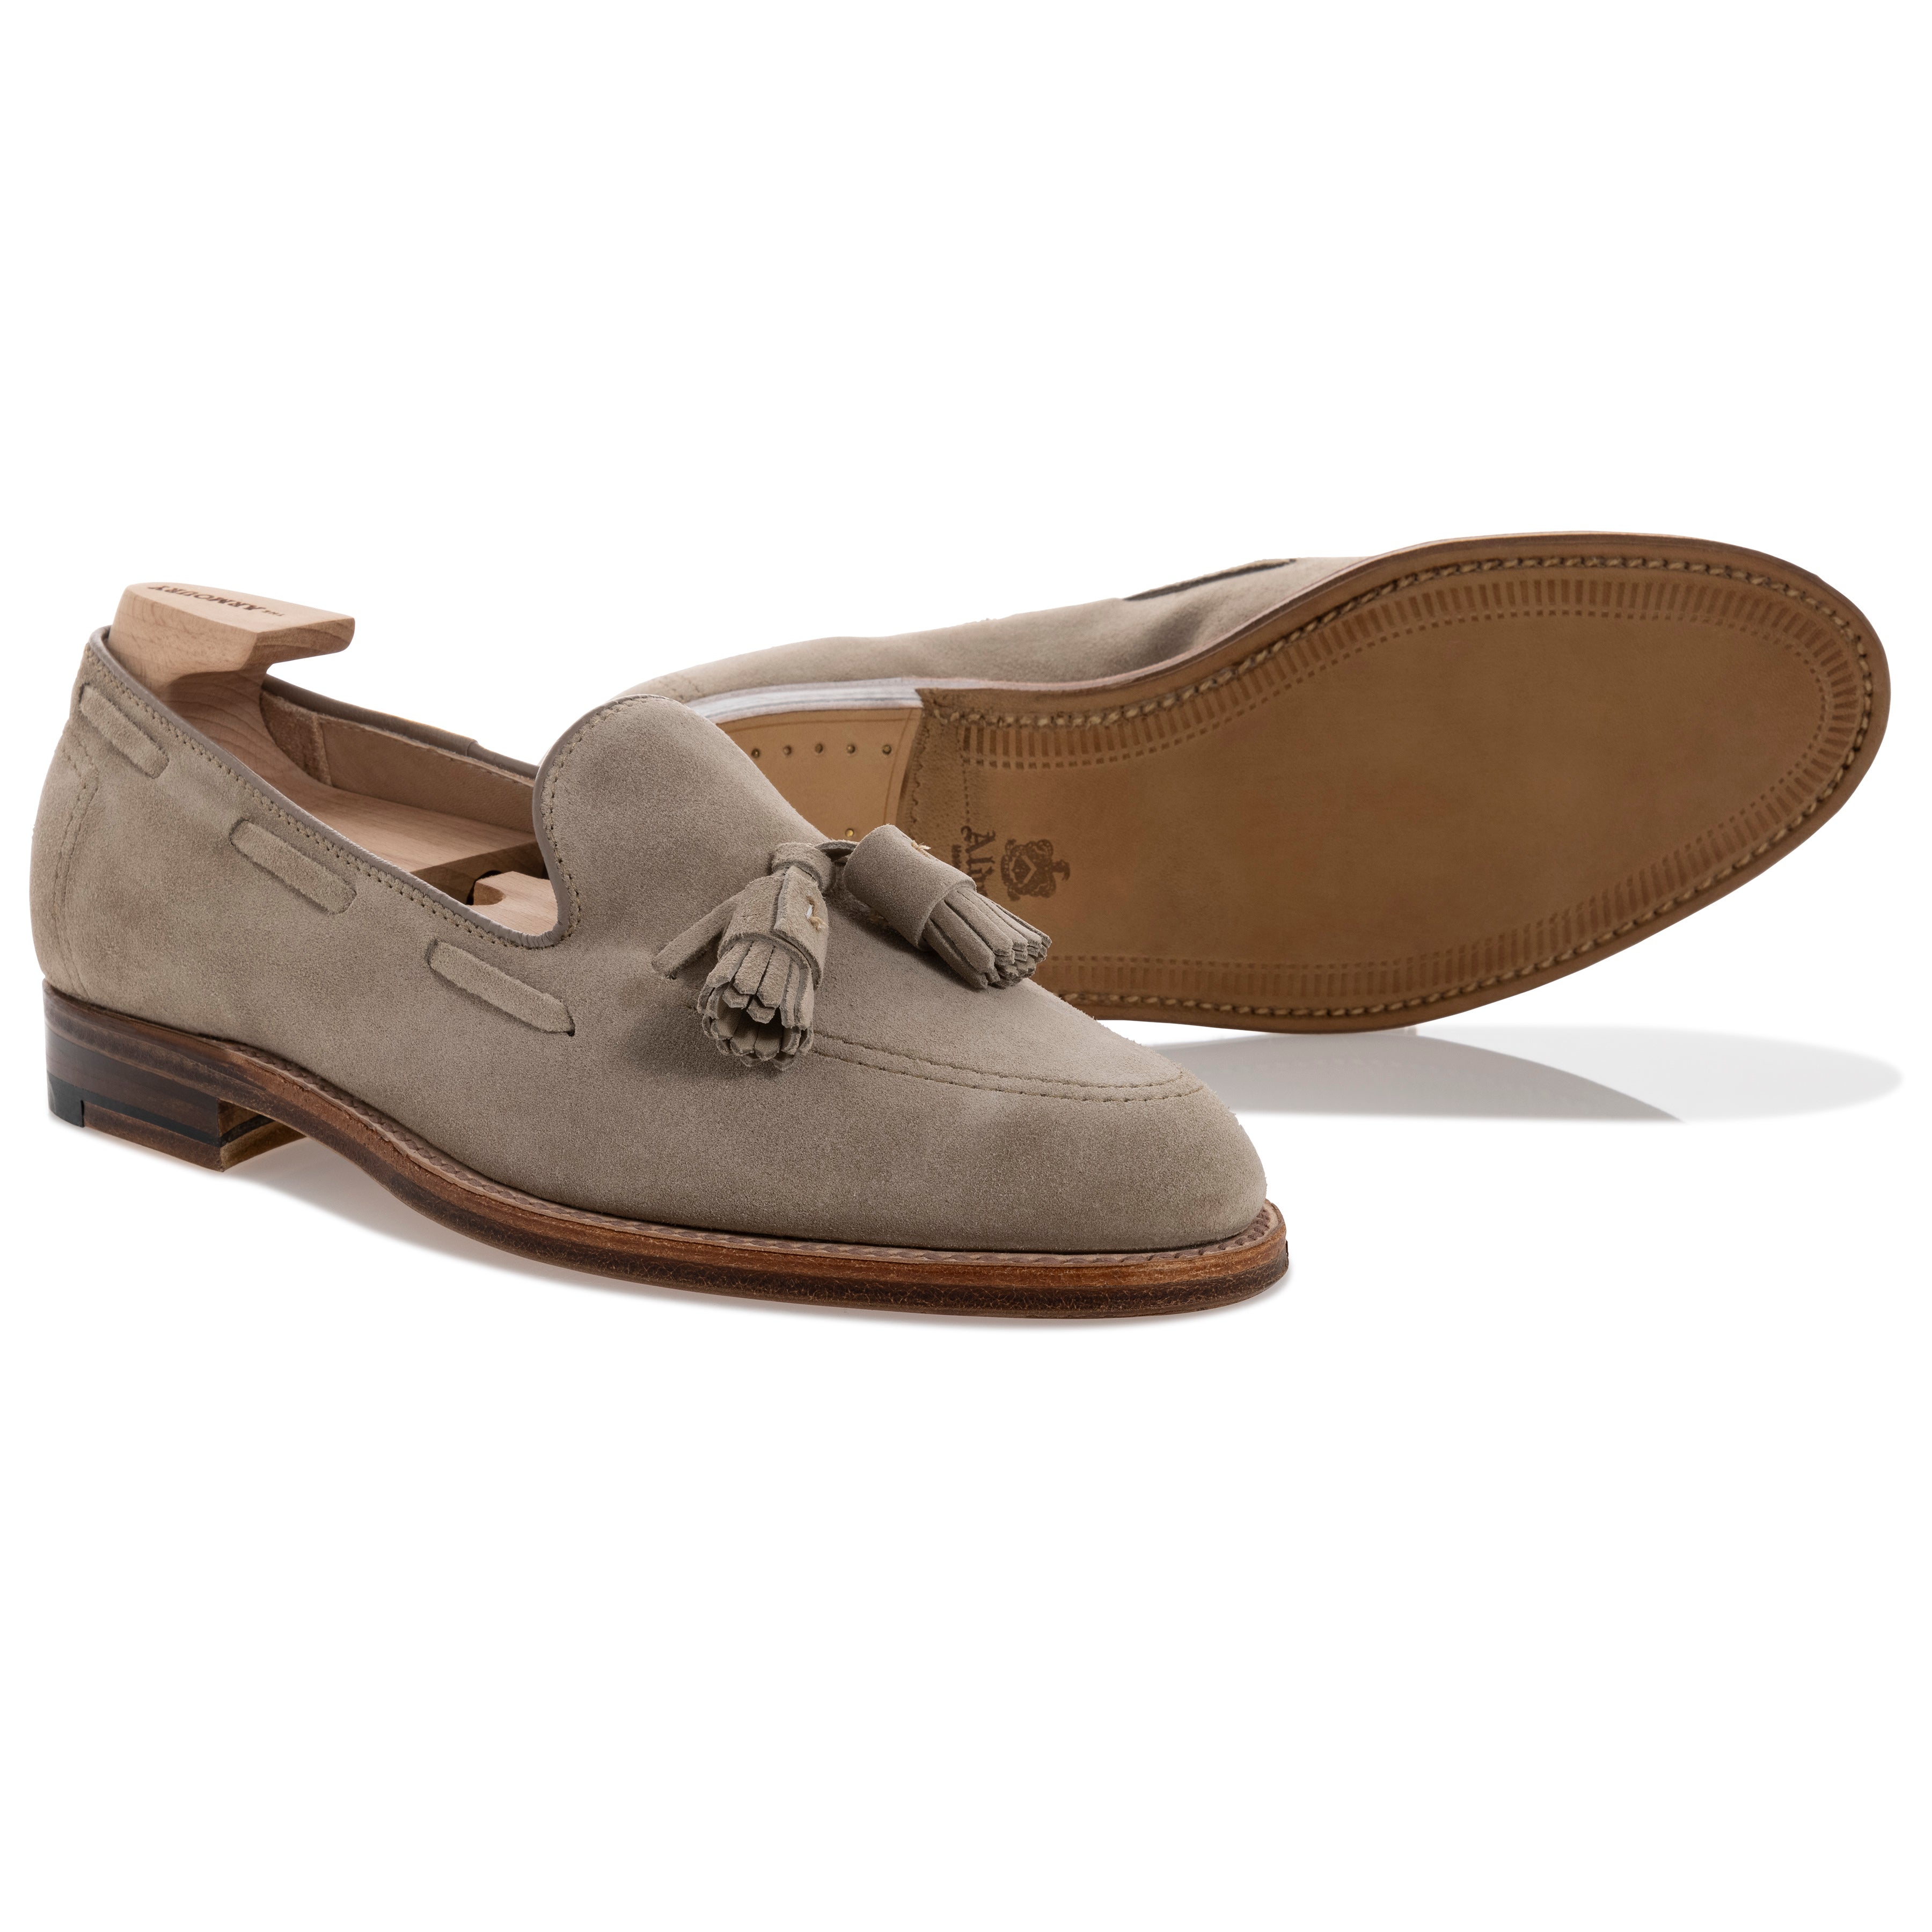 Unlined Suede Tassel Loafer - The Armoury